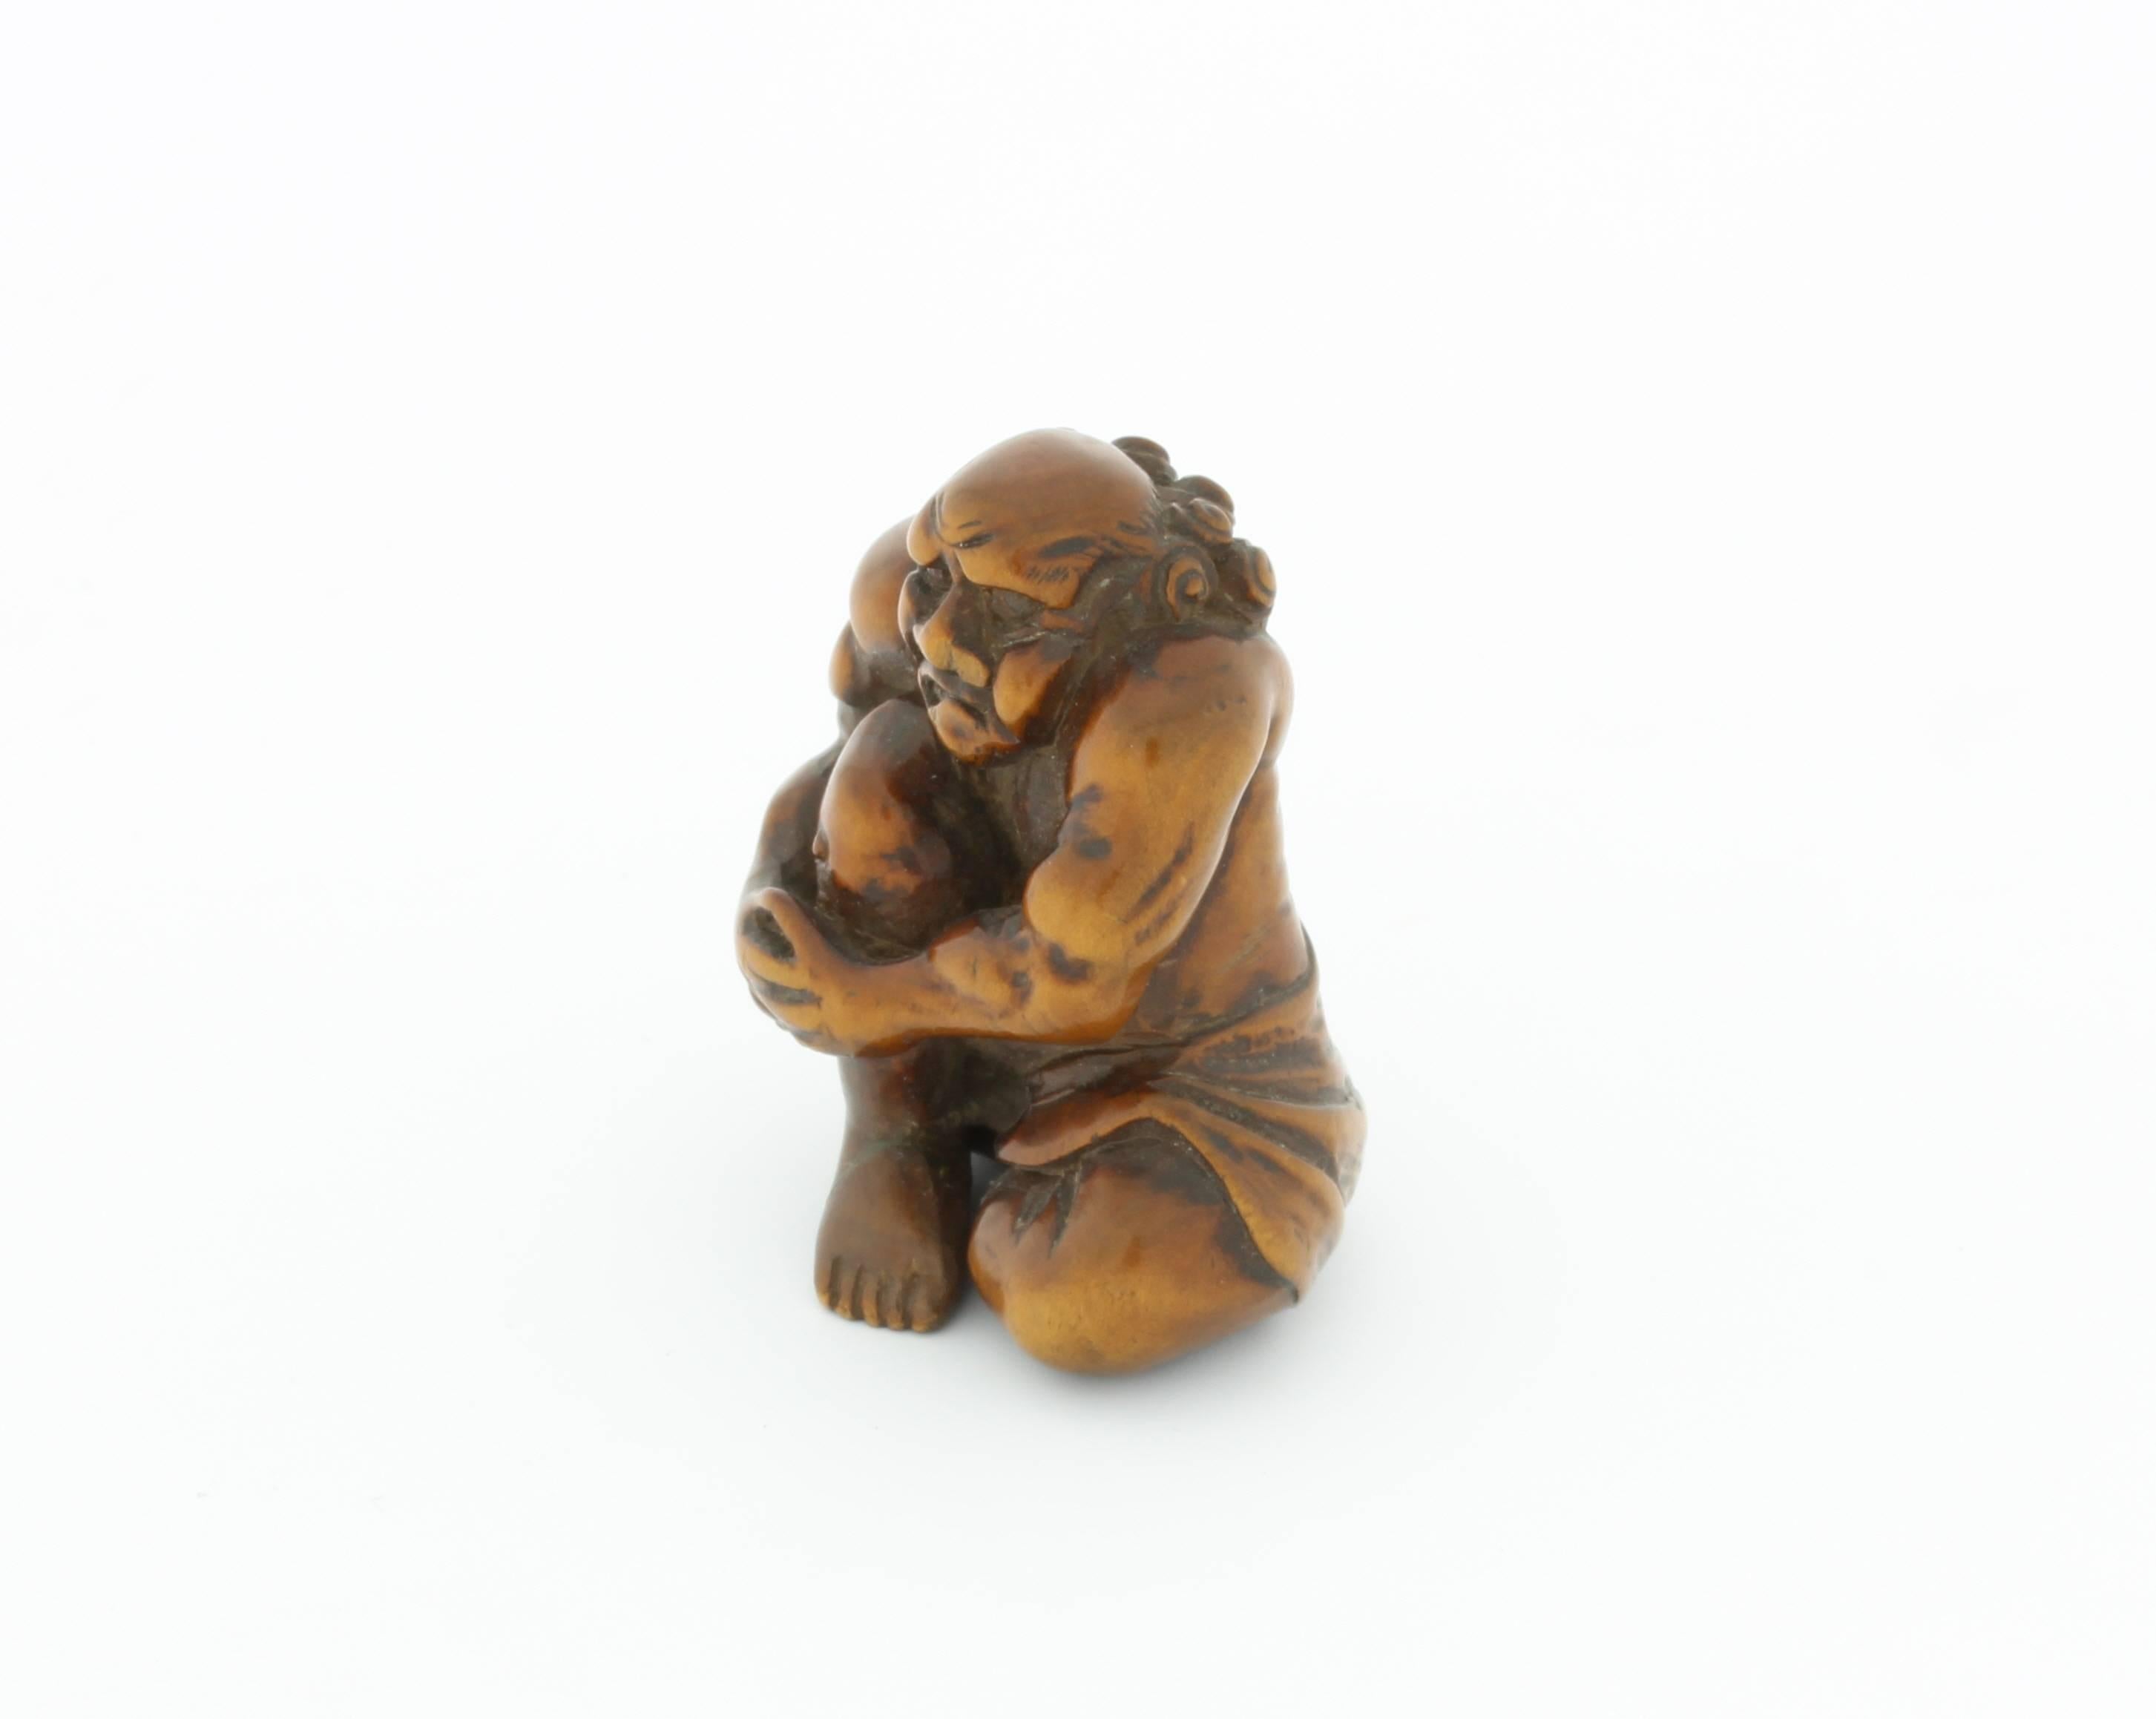 Netsuke were practical fashion accessories worn by Japanese men of the Edo period (1615 - 1868). Kimono has no pockets, and only women's garments had places in the sleeve to keep small objects. In contrast, men would carry their personal accessories